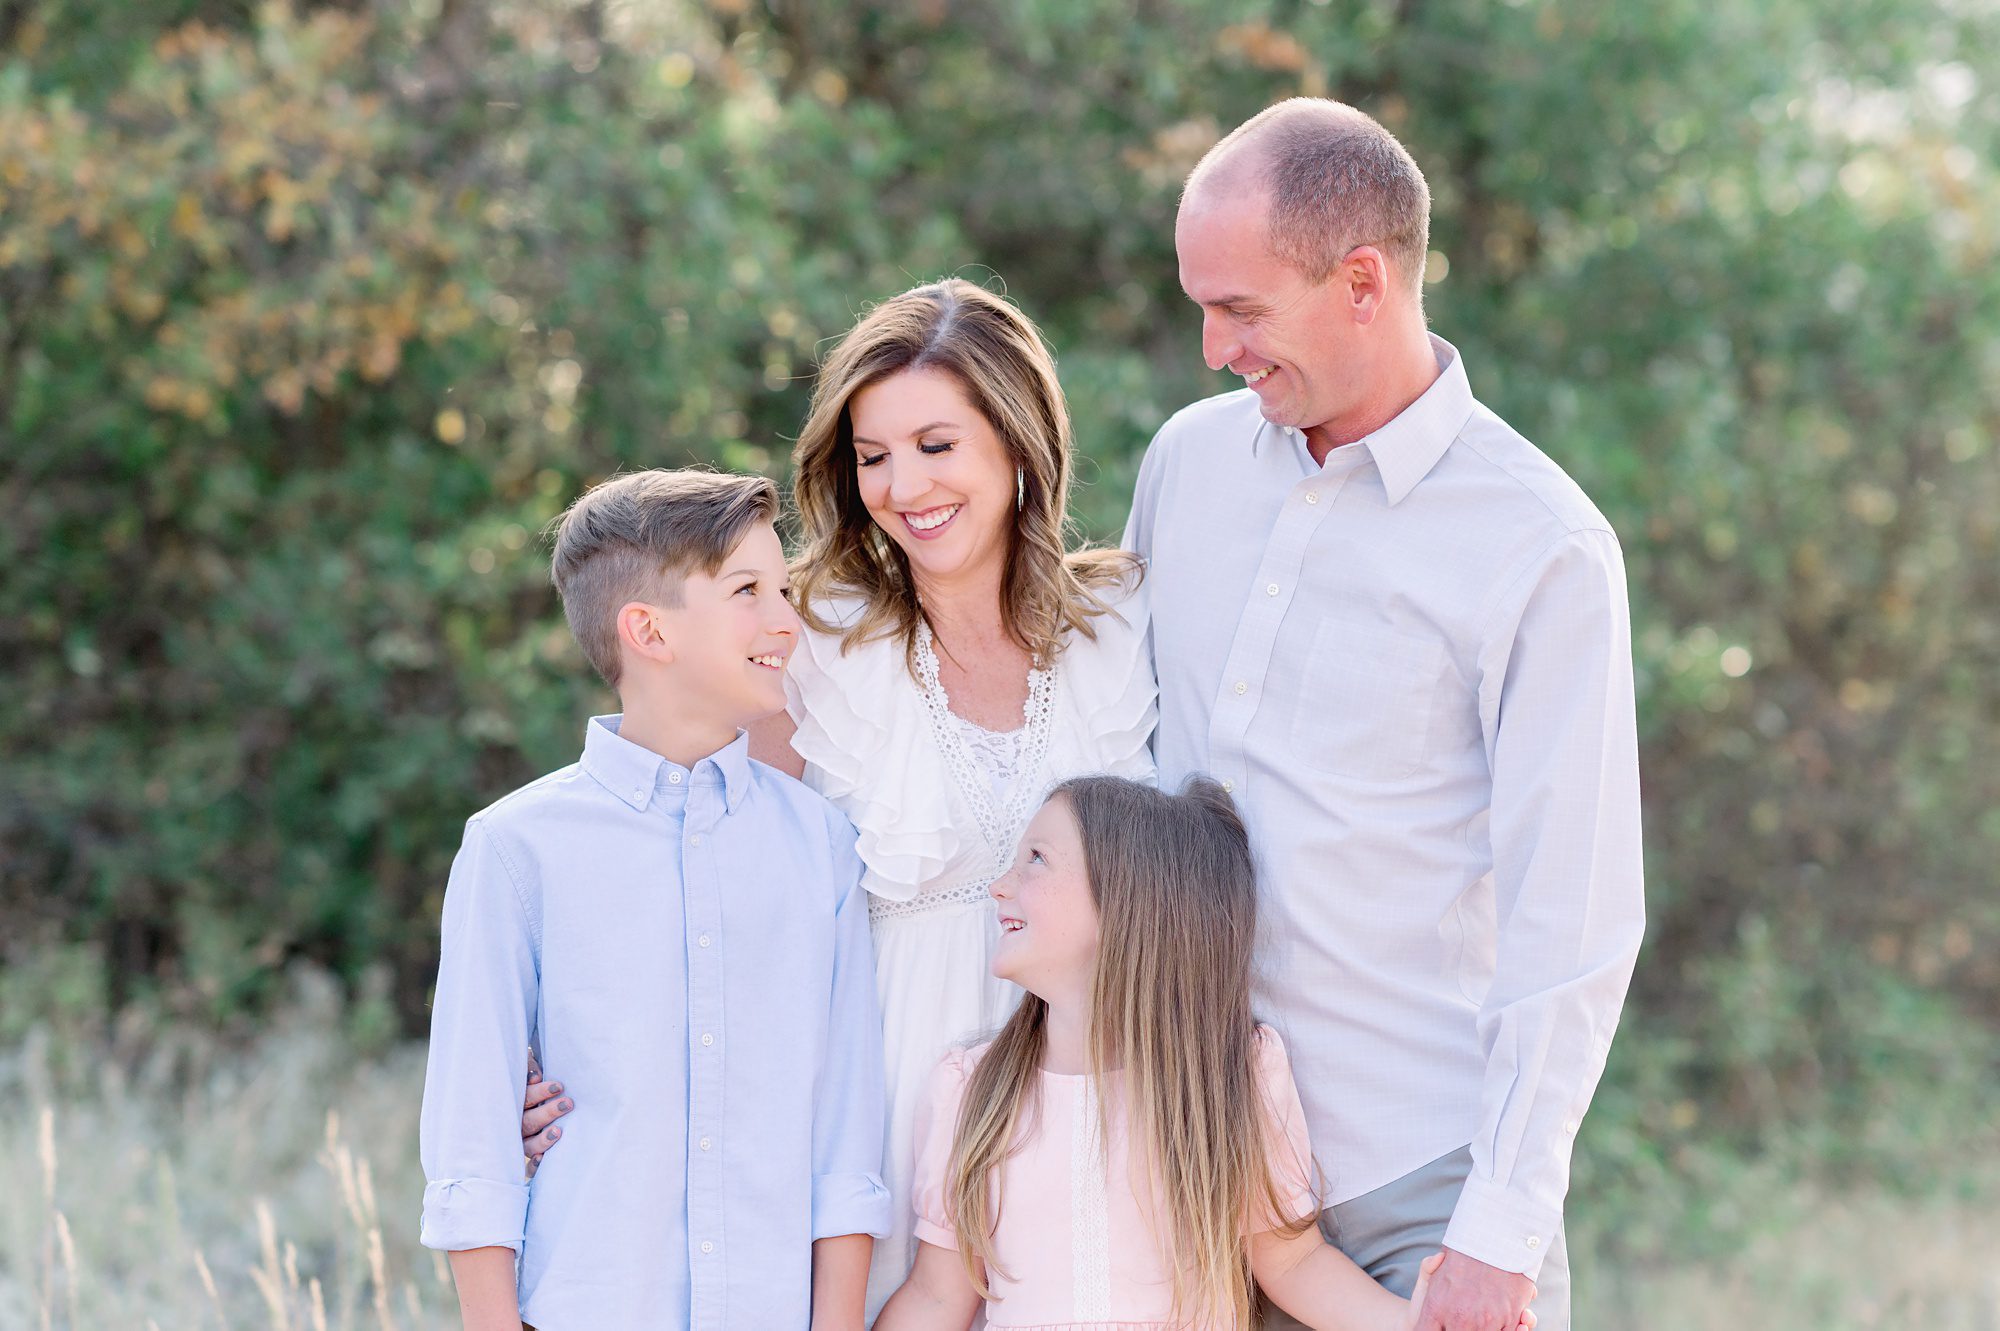 Family of four gets fun natural portraits done at south valley park in Littleton, Colorado